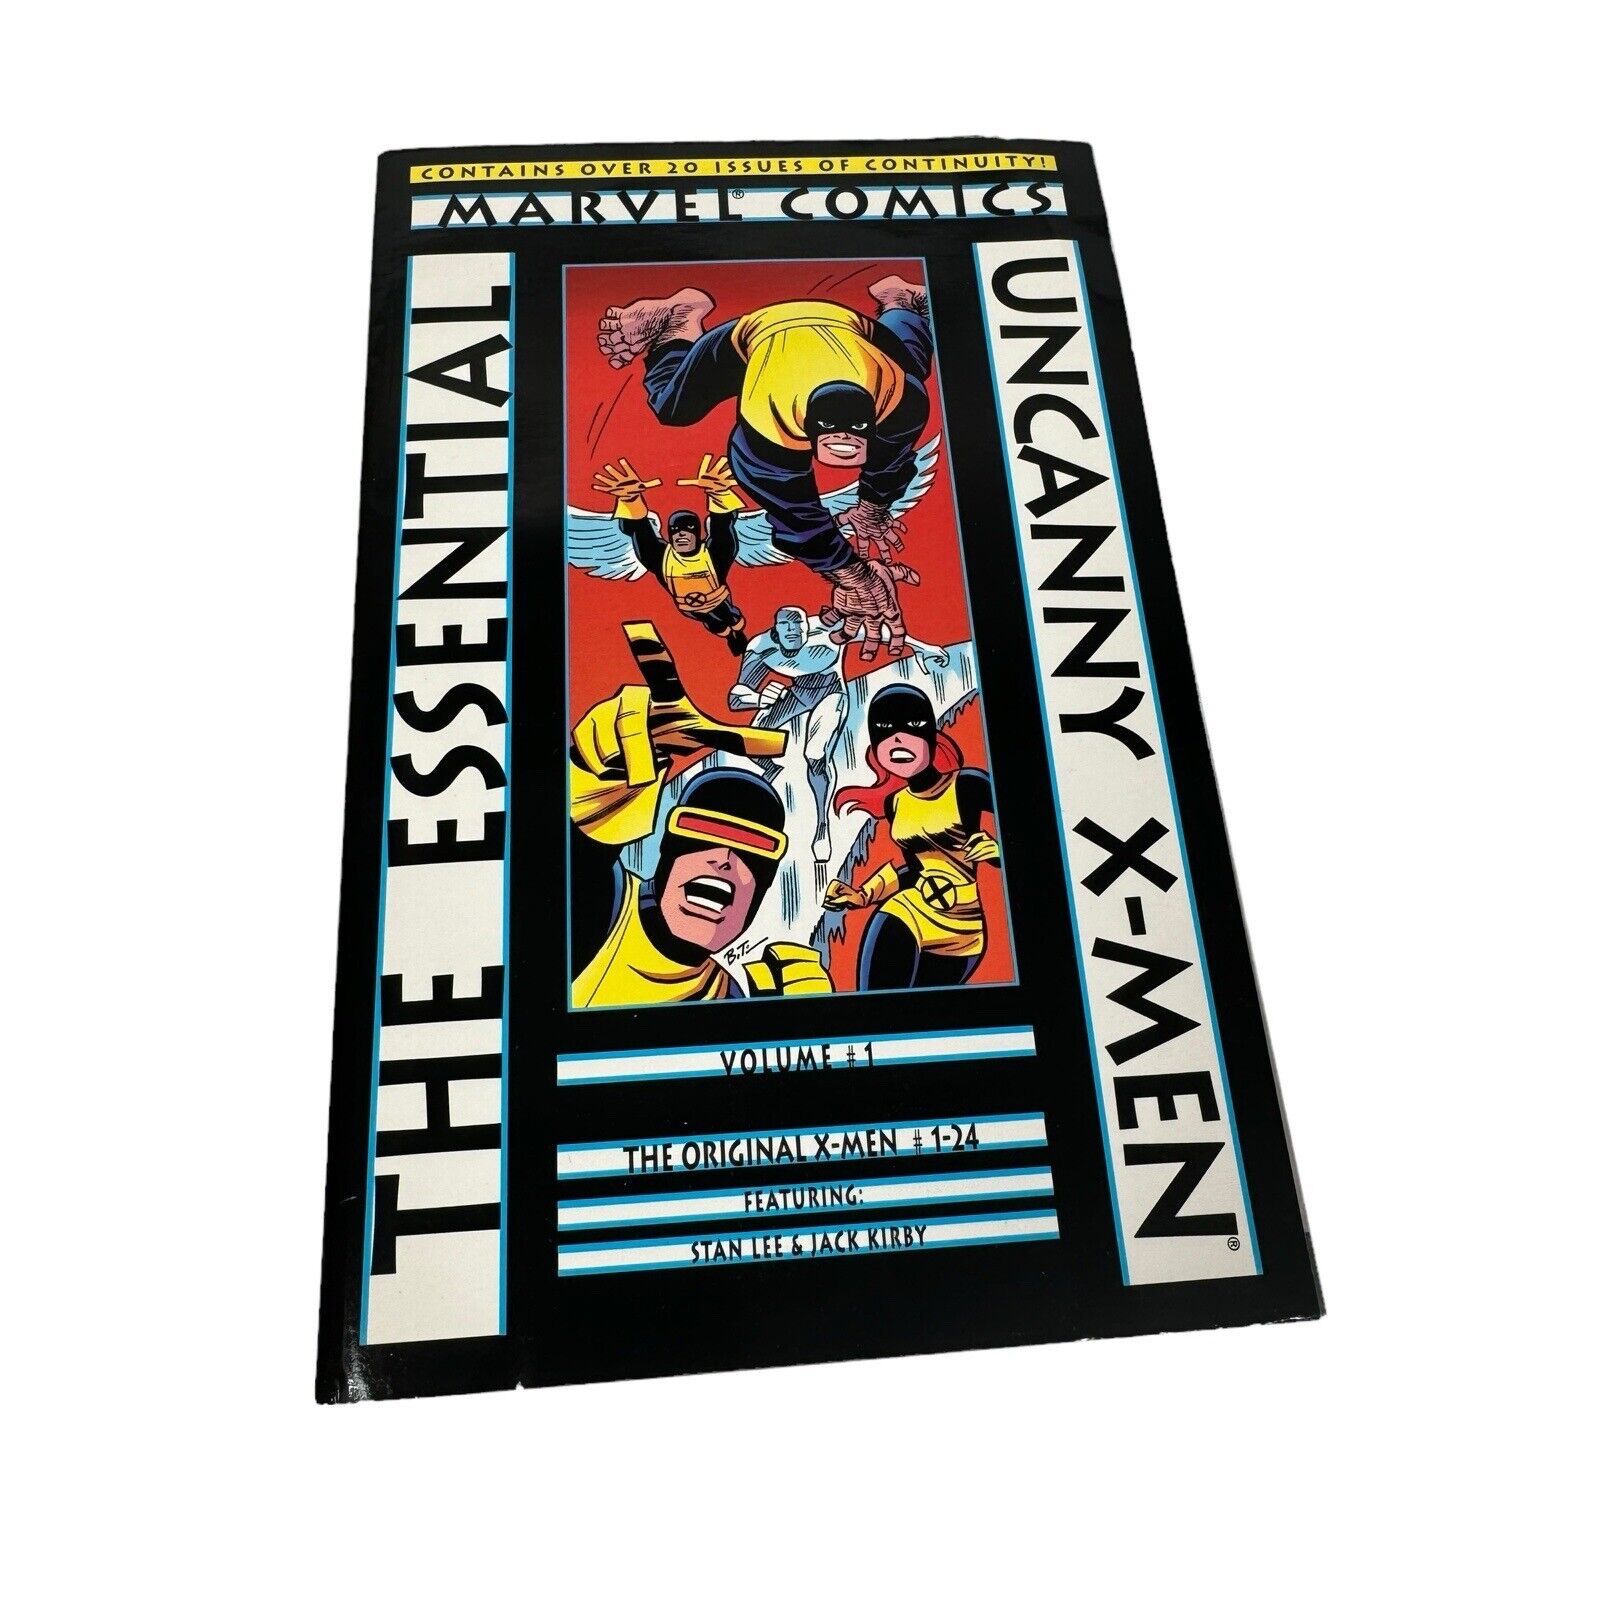 THE ESSENTIAL UNCANNY X-MEN VOL. 1 Ft Stan Lee & Jack Kirby, 1999 First Print